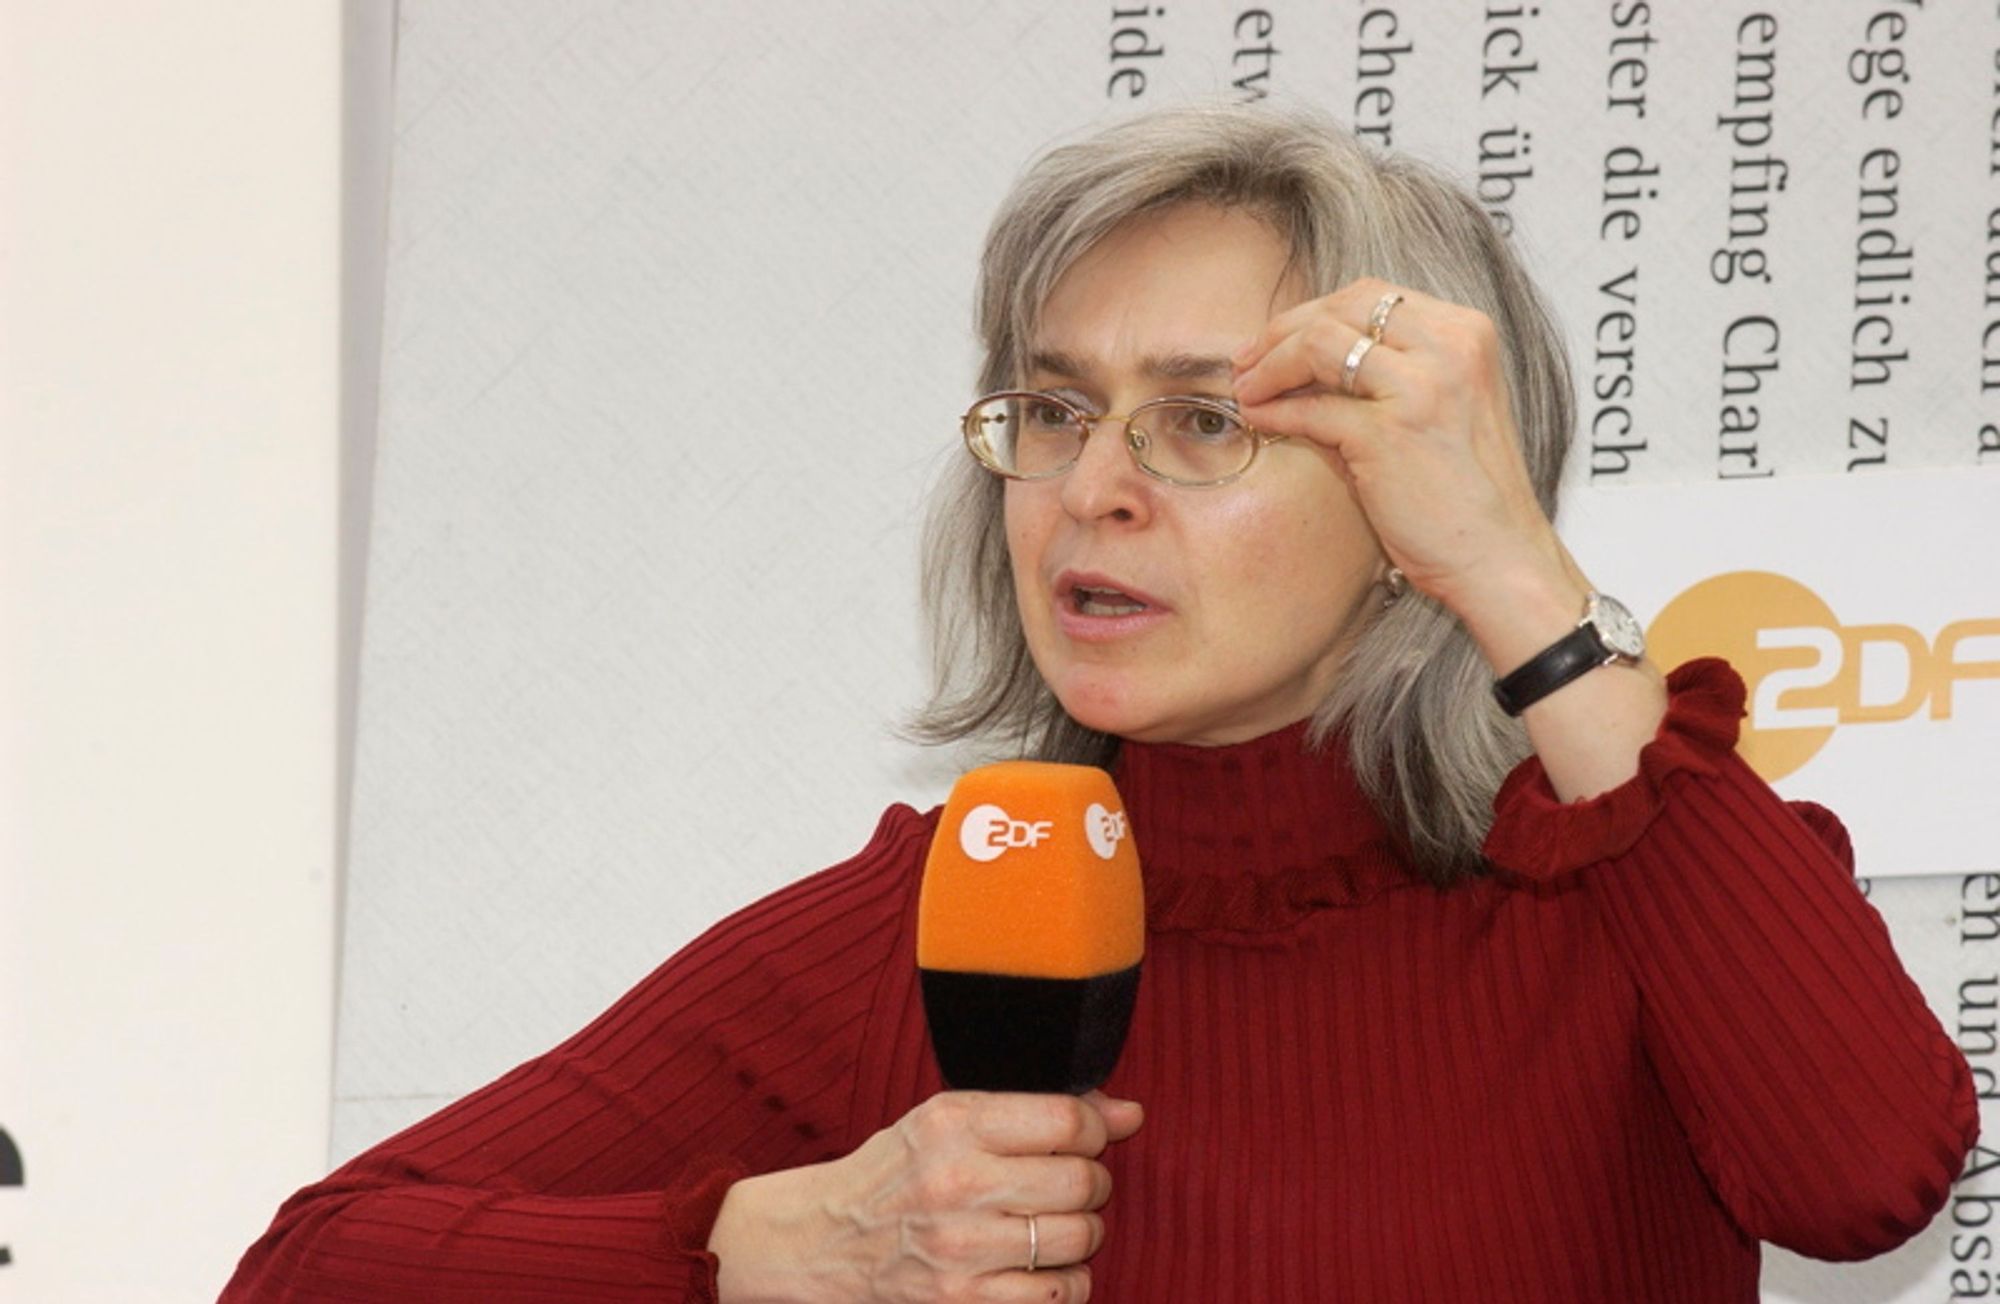 Anna Politkovskaya at the presentation of her book Putins Russia during the 2005 Leipzig Book Fair.